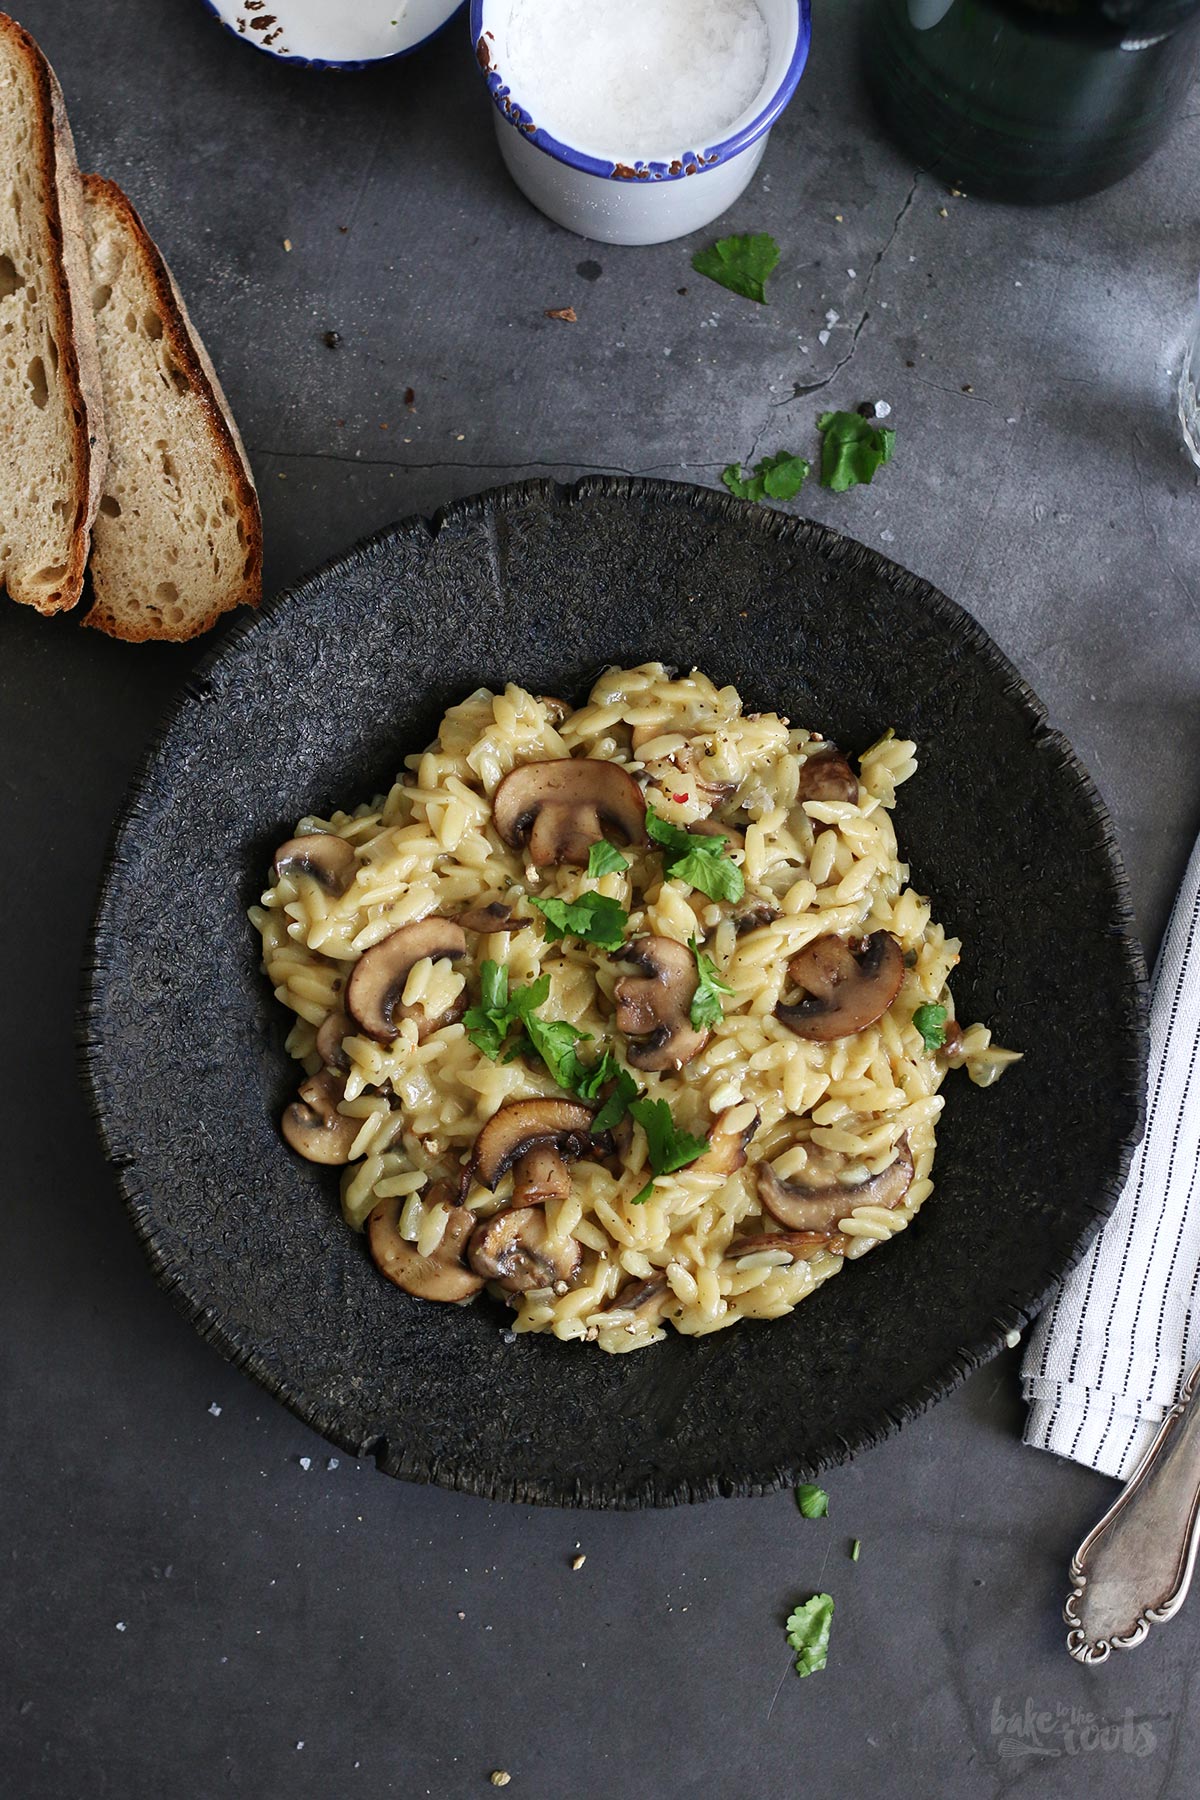 Creamy Risoni with Mushrooms & Parmesan | Bake to the roots